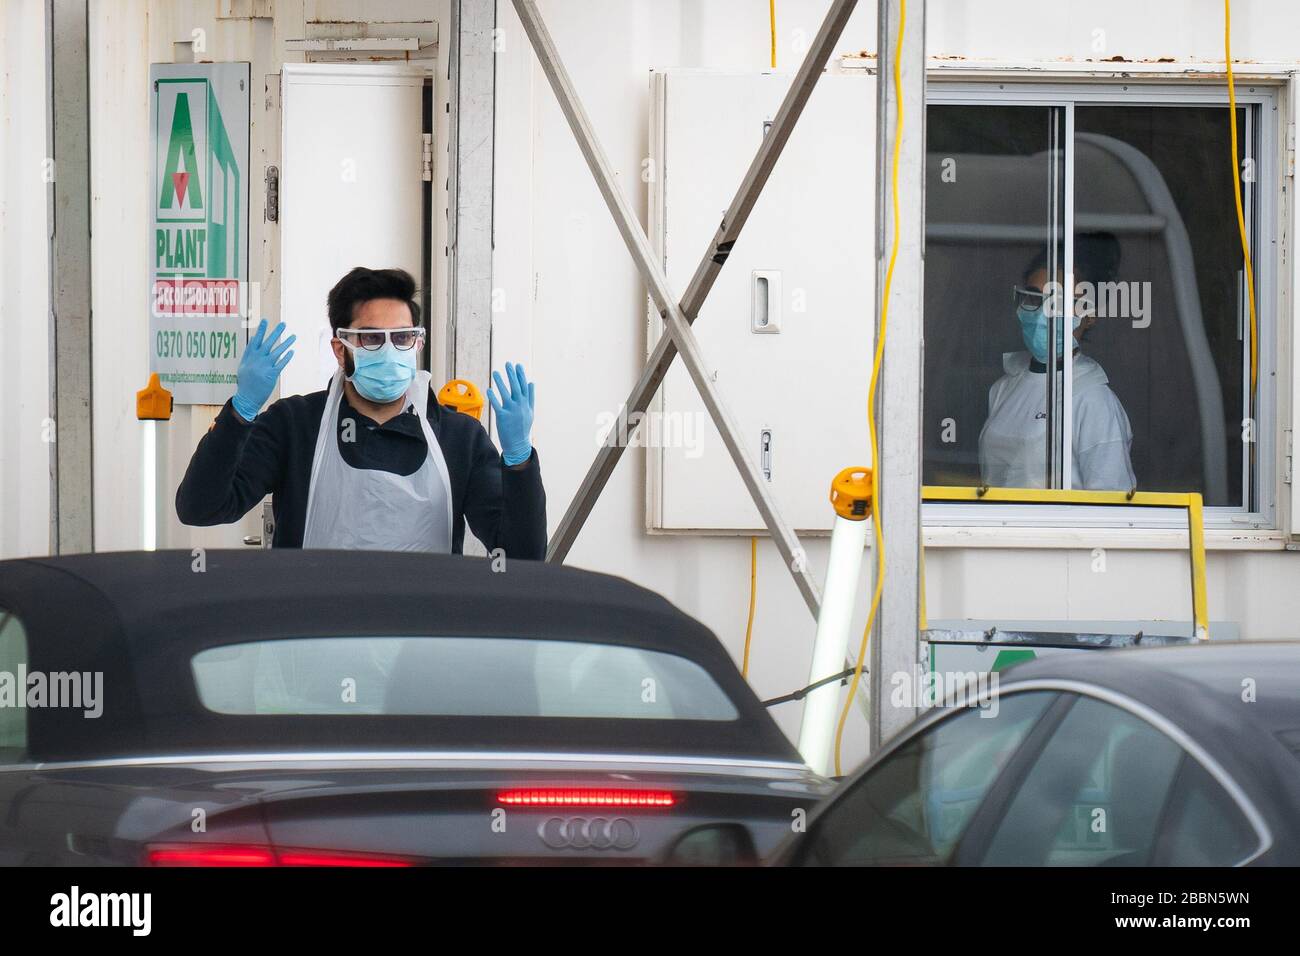 Medical staff at an NHS drive through coronavirus disease (COVID-19) testing facility in an IKEA car park, Wembley as the UK continues in lockdown to help curb the spread of the coronavirus. Stock Photo